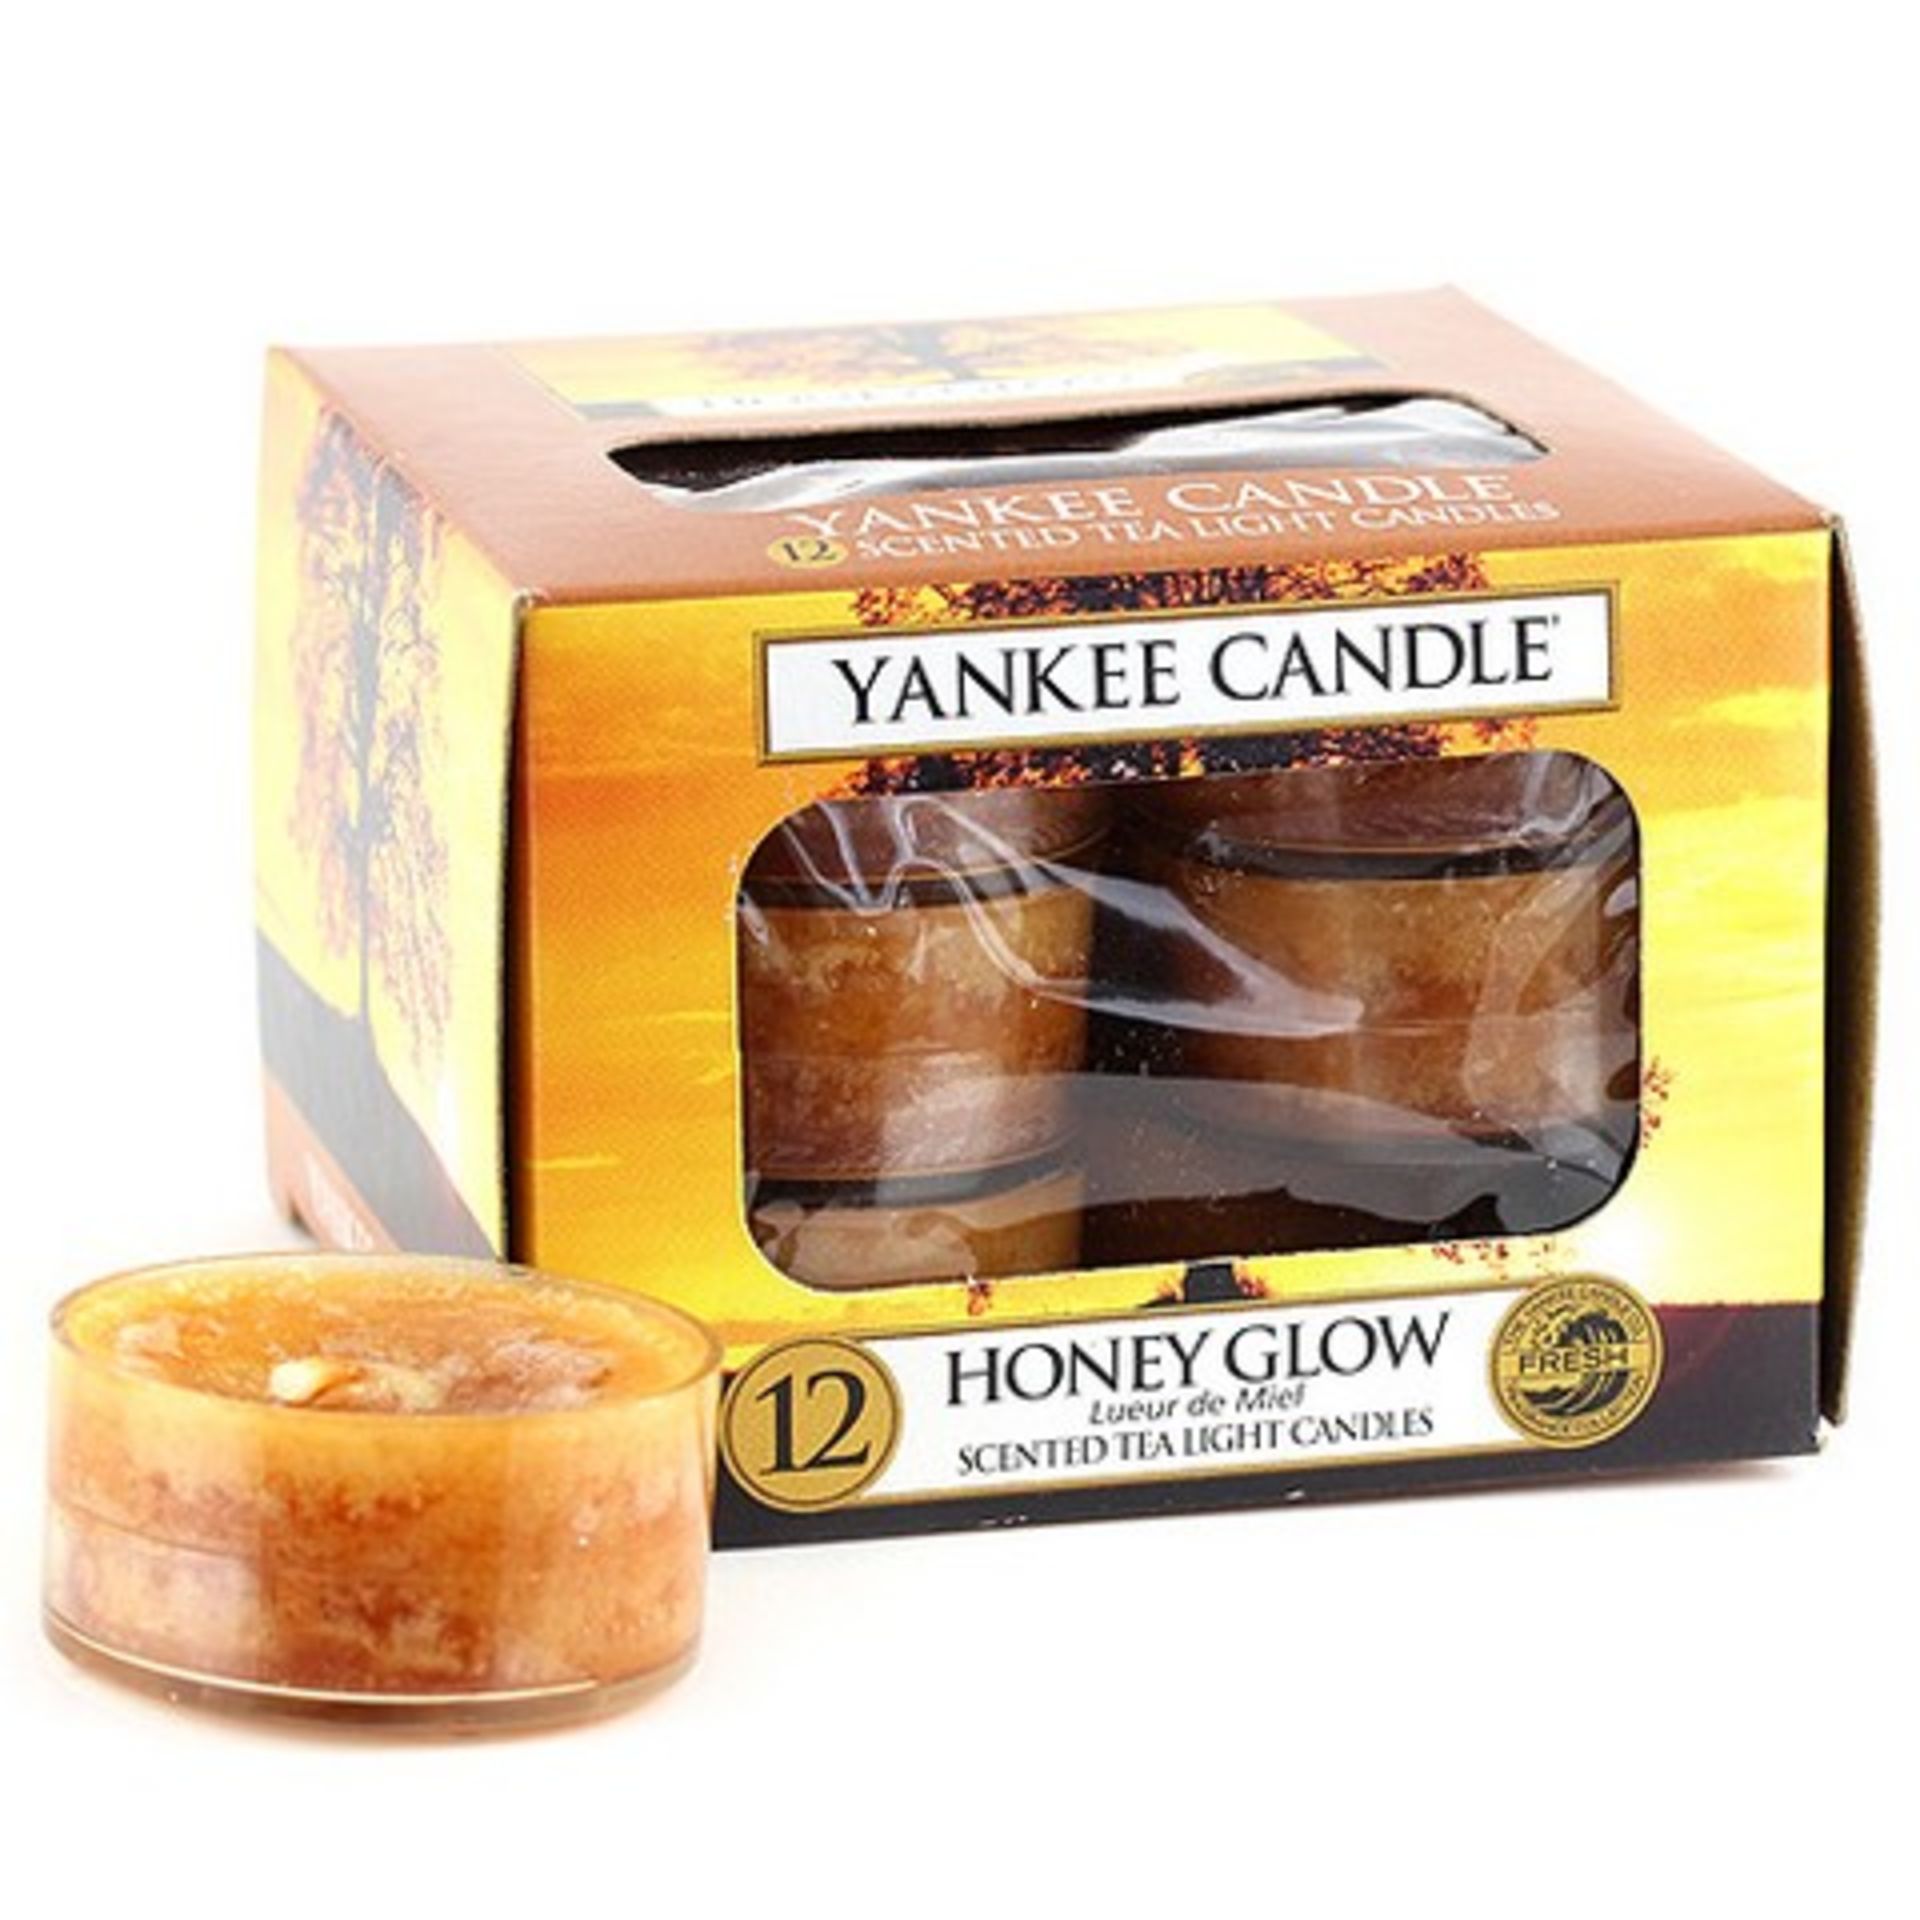 V Brand New 12 Yankee Candle Scented Tea Light Candles Honey Glow